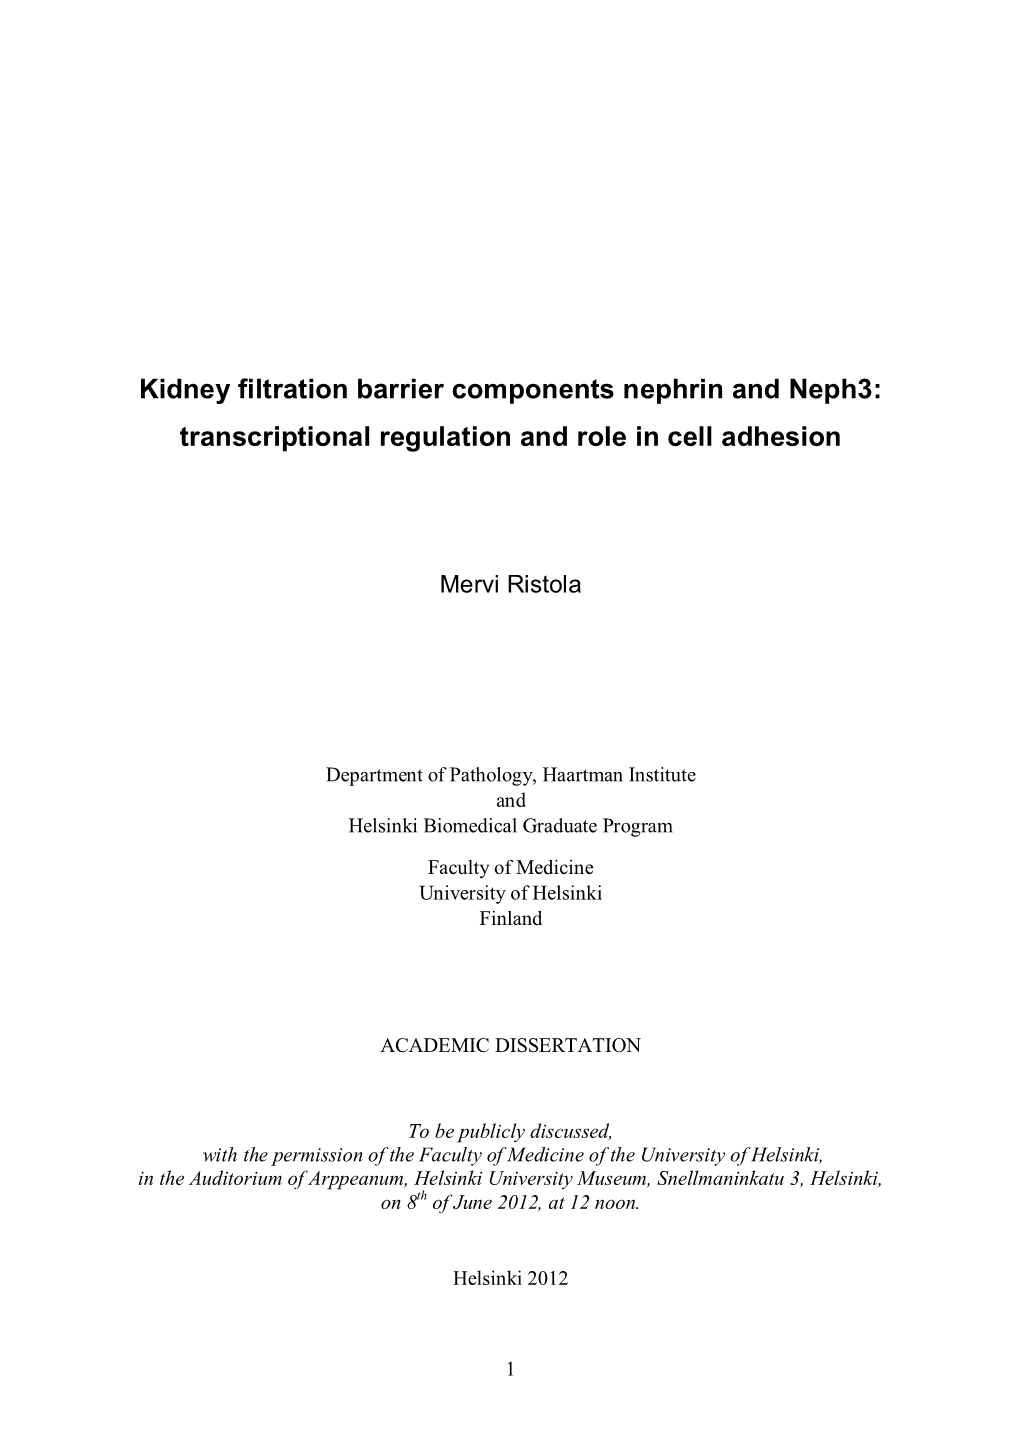 Kidney Filtration Barrier Components Nephrin and Neph3: Transcriptional Regulation and Role in Cell Adhesion